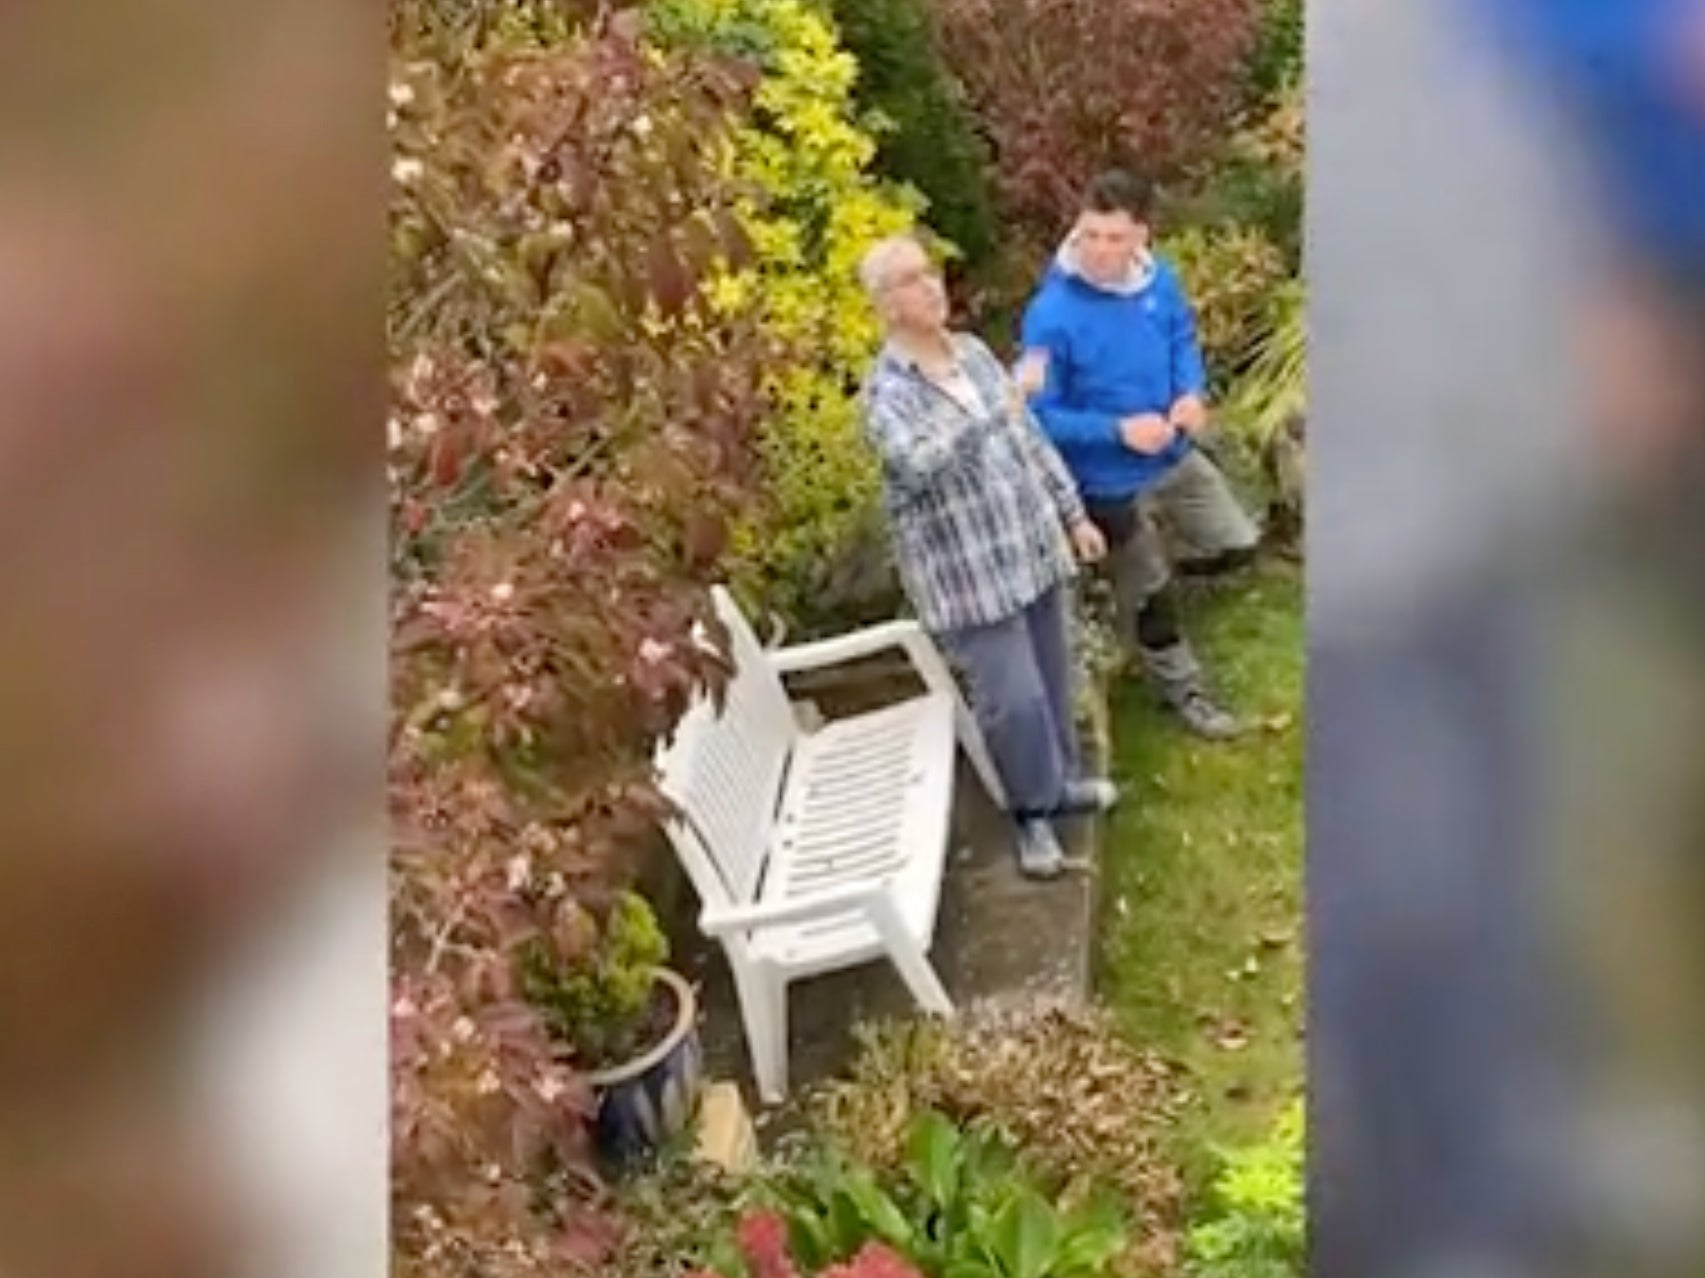 Cowboy builders jailed after bragging about elderly victim scam on camera The Independent